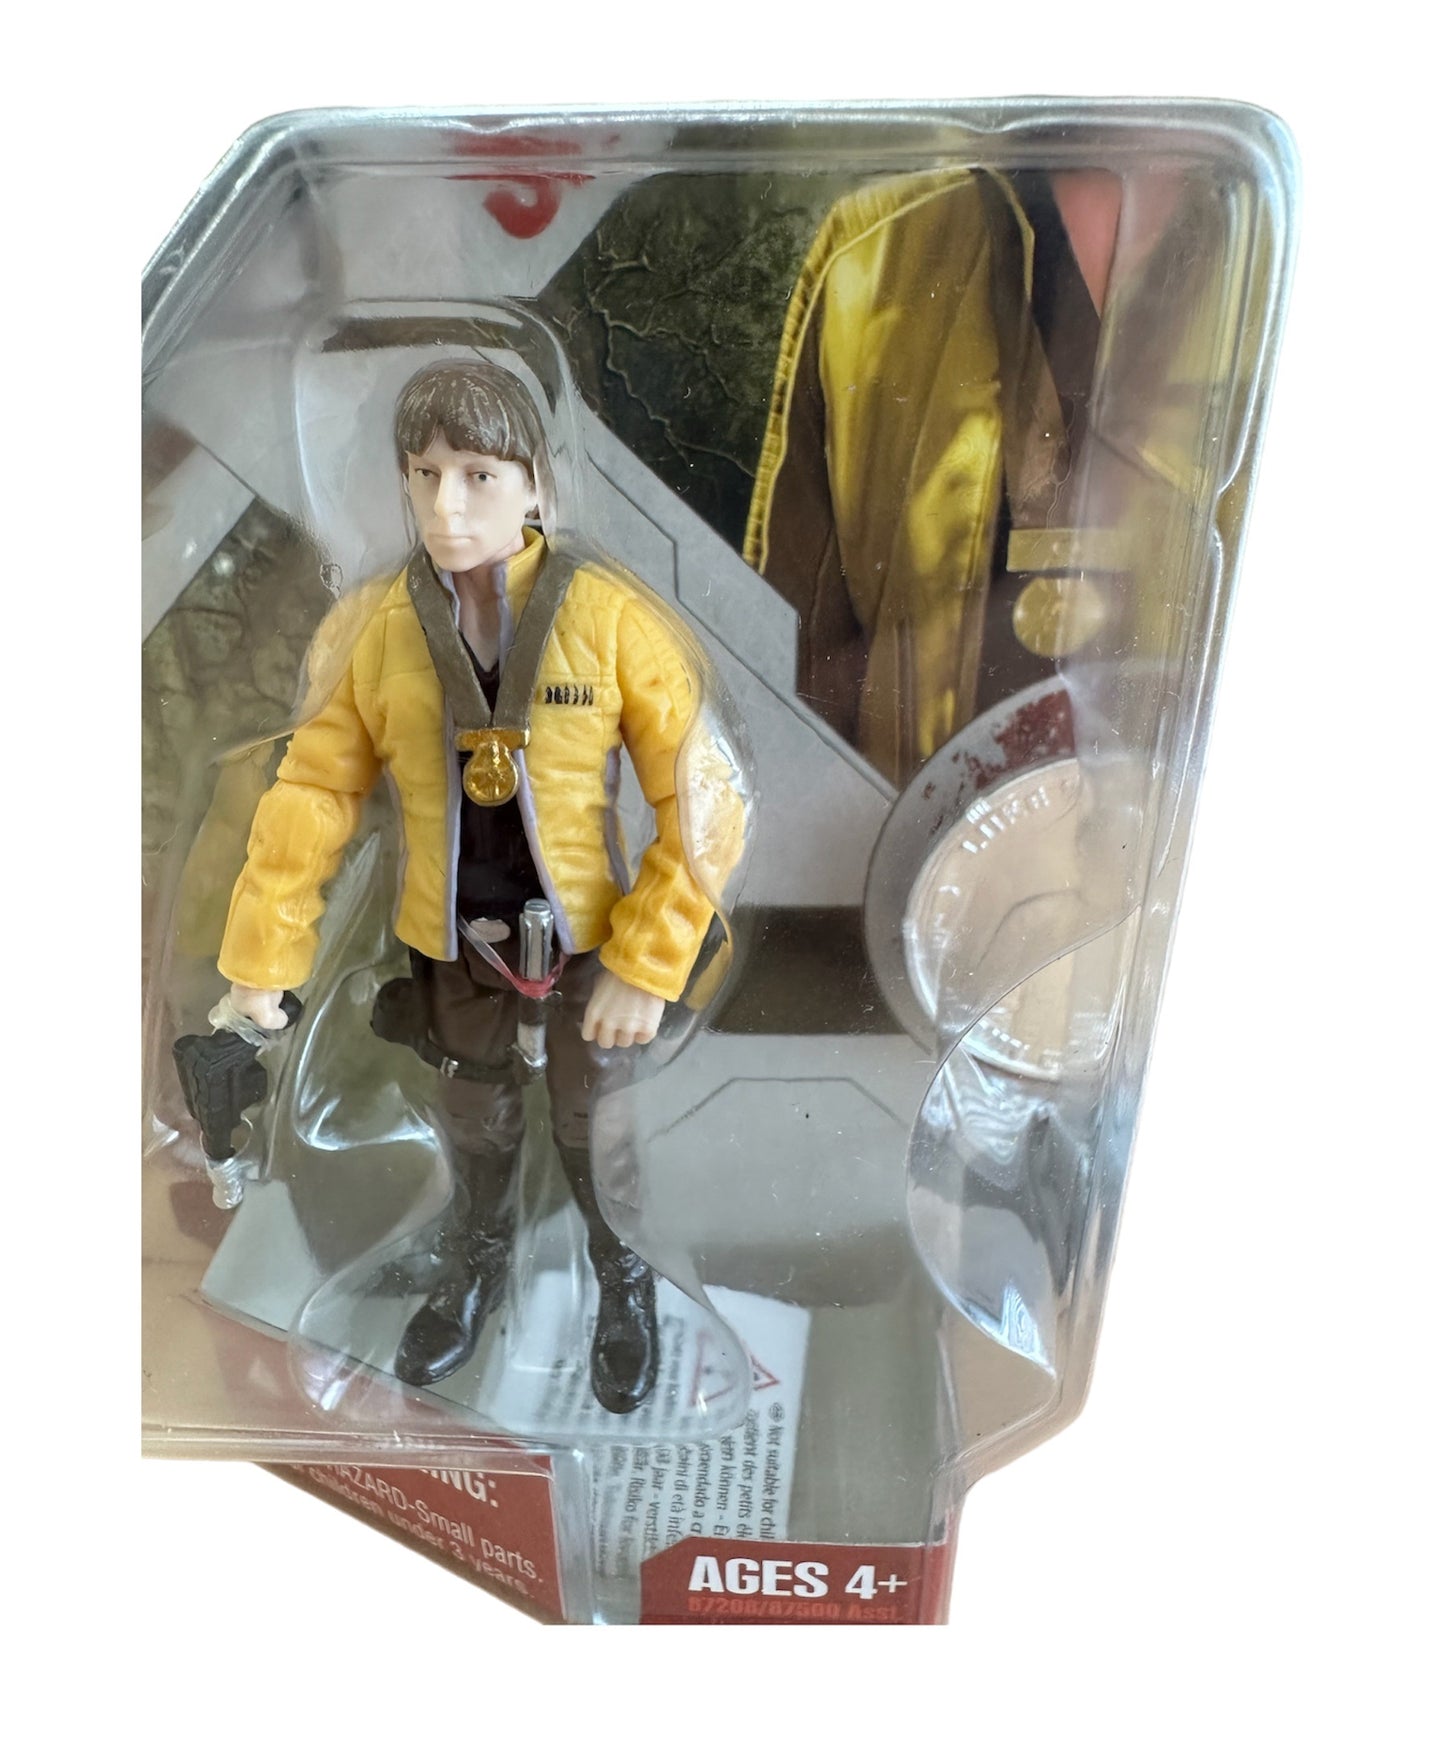 Vintage 2007 Star Wars Saga 30th Anniversary A New Hope Luke Skywalker Action Figure With Exclusive Collector Coin - Brand New Factory Sealed Shop Stock Room Find